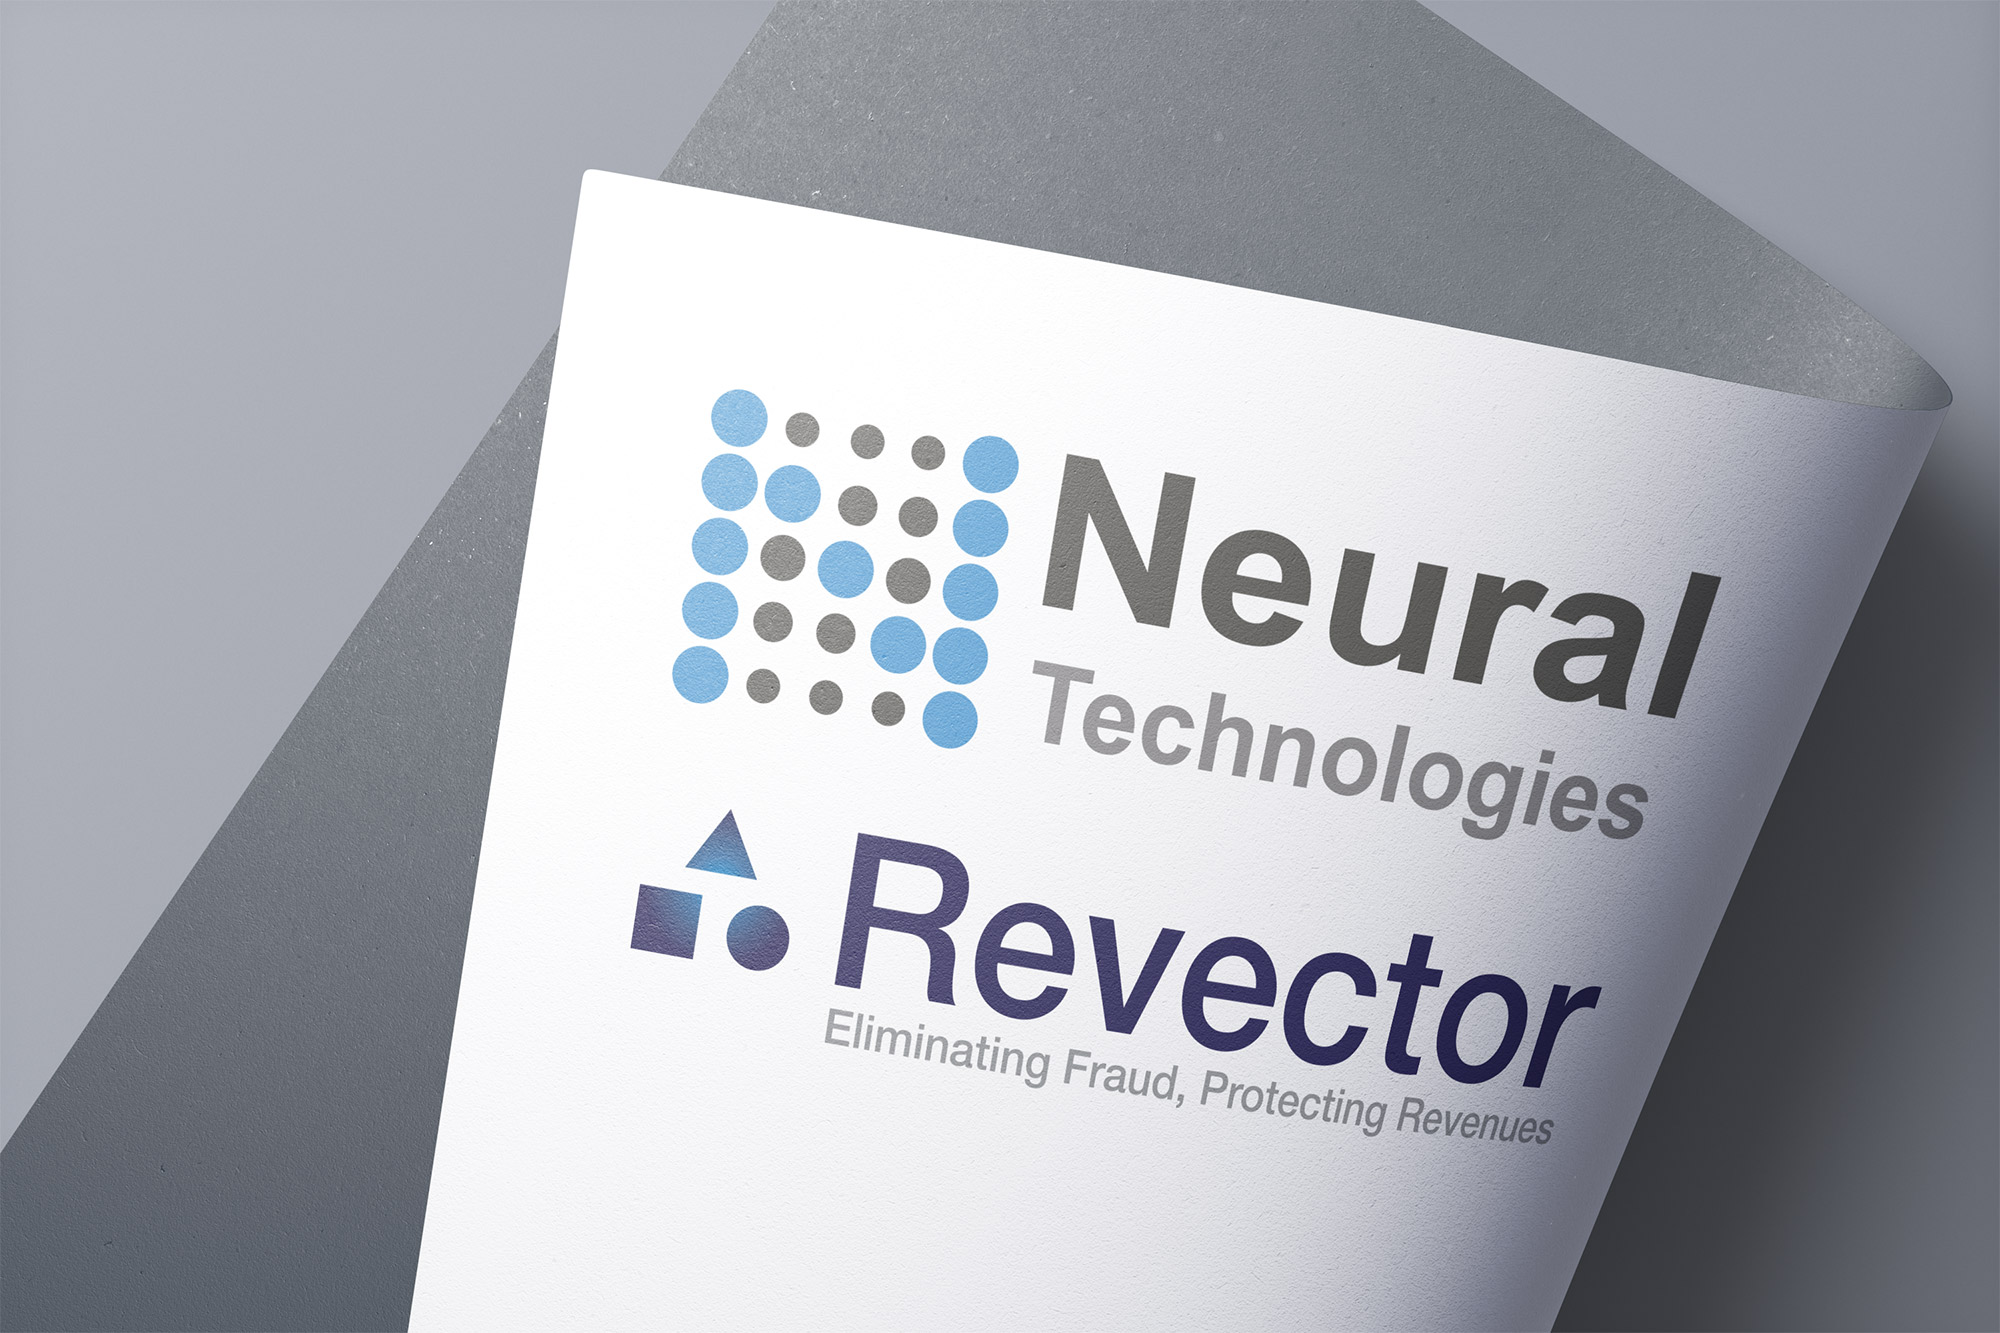 Revector partners with Neural Technologies